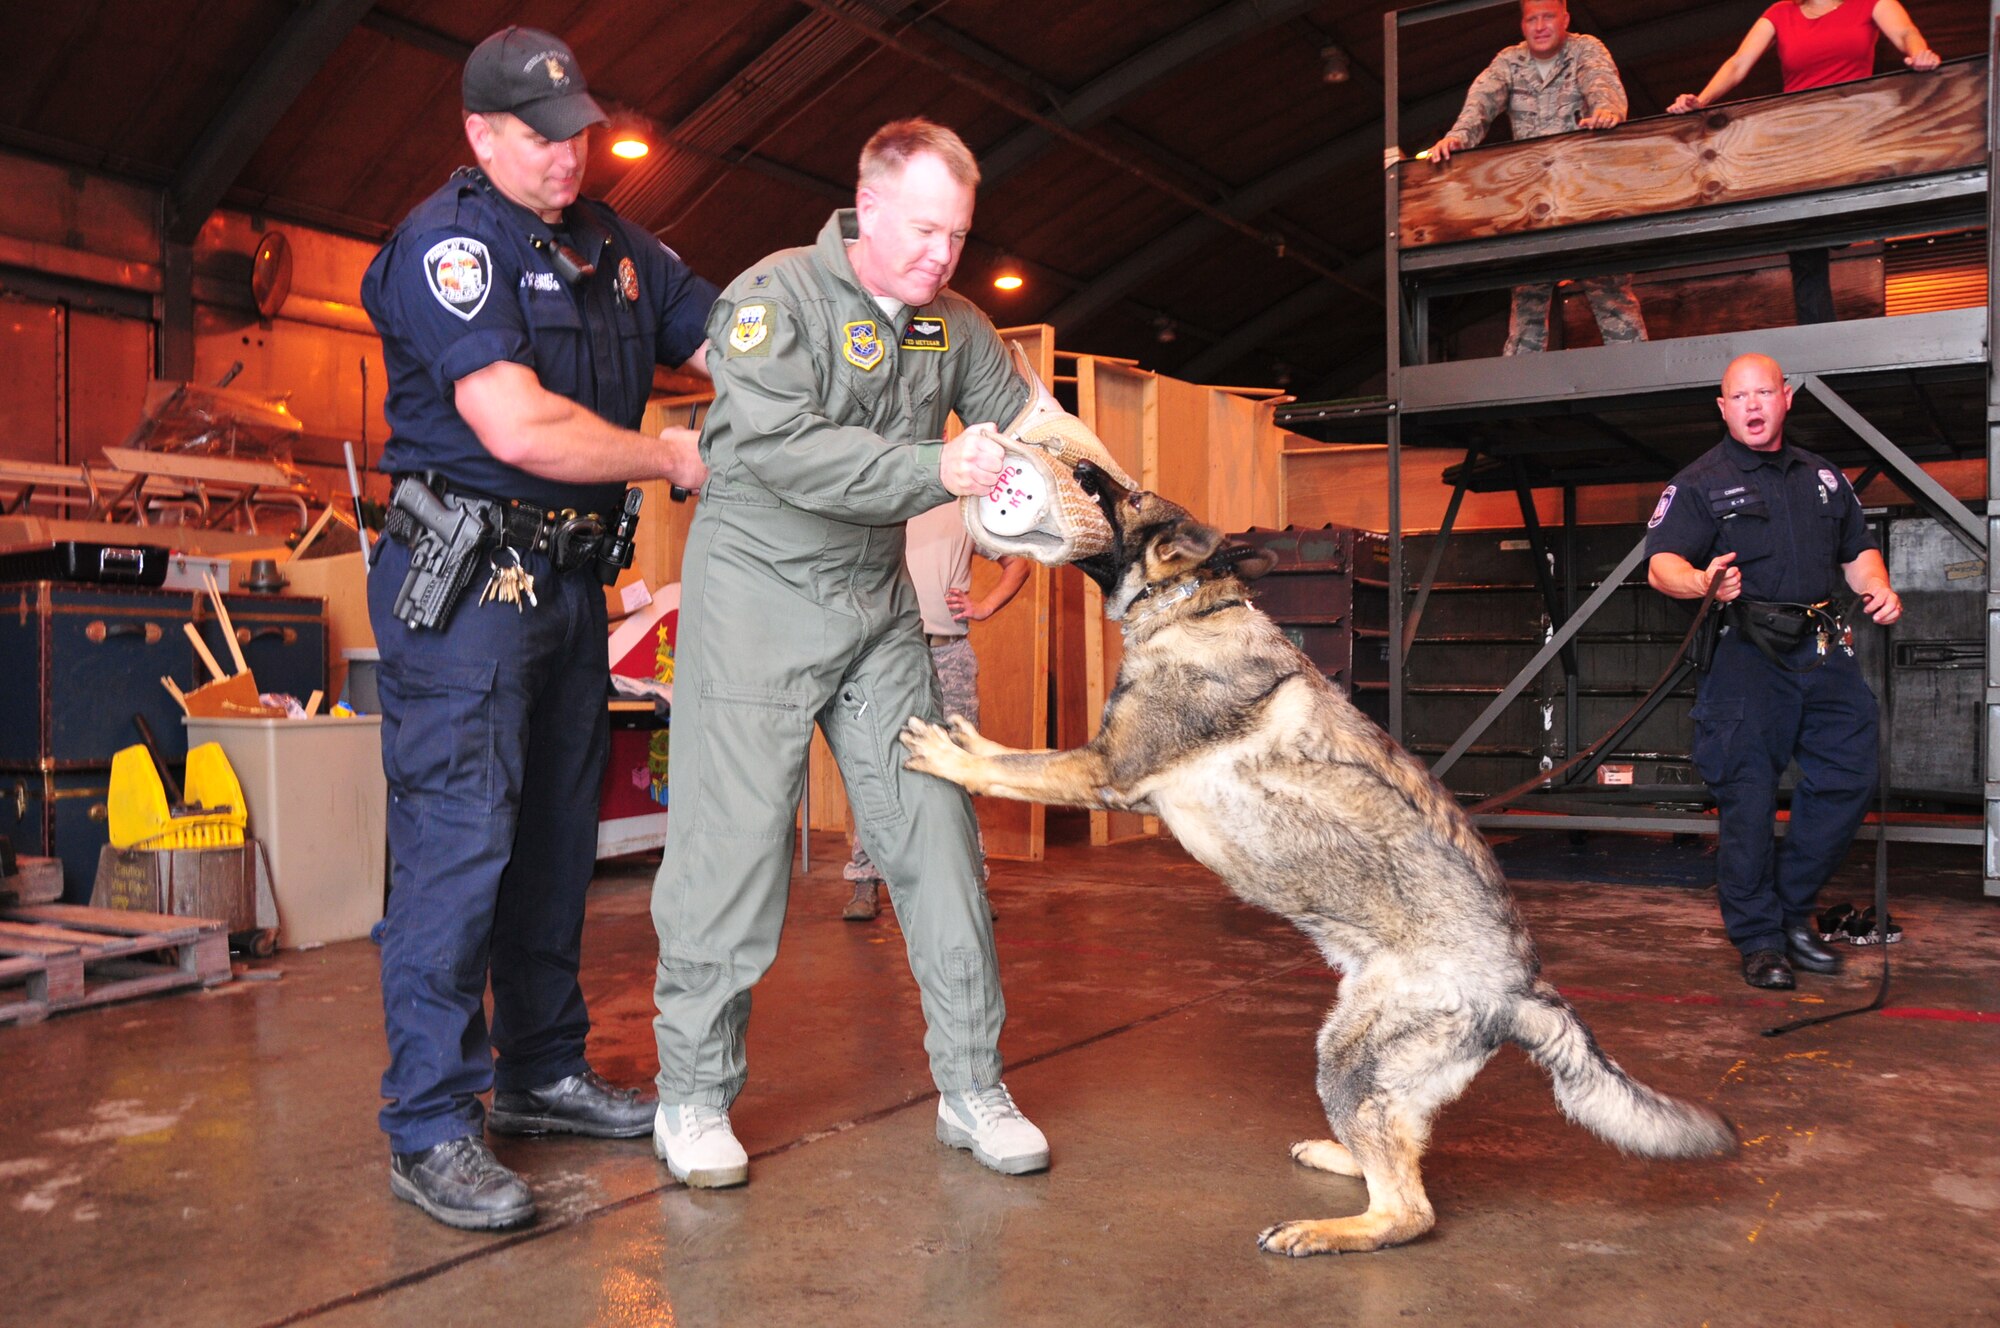 The 171st Air Refueling Wing, located near Pittsburgh, Pennsylvania, provides a secure location for local law enforcement agencies to train their K-9 units, August 28, 2013. Beaver County, Center Township, Findlay Township and Scott Township Police Departments attended. K-9 units must continuously train on building, vehicle, area, and evidence searches to fulfill training requirements. Training also includes apprehension, narcotic detection, tracking scenarios, and handler protection.  Having a secure, controlled location is important for efficient training and for the safety of the dogs. In addition to fulfilling training requirements, this combined effort also allows the 171st and local law enforcement agencies the ability to share ideas and training techniques in order to better serve the community and the commonwealth (U.S. Air National Guard Photo by Tech. Sgt. Shawn Monk/Released)